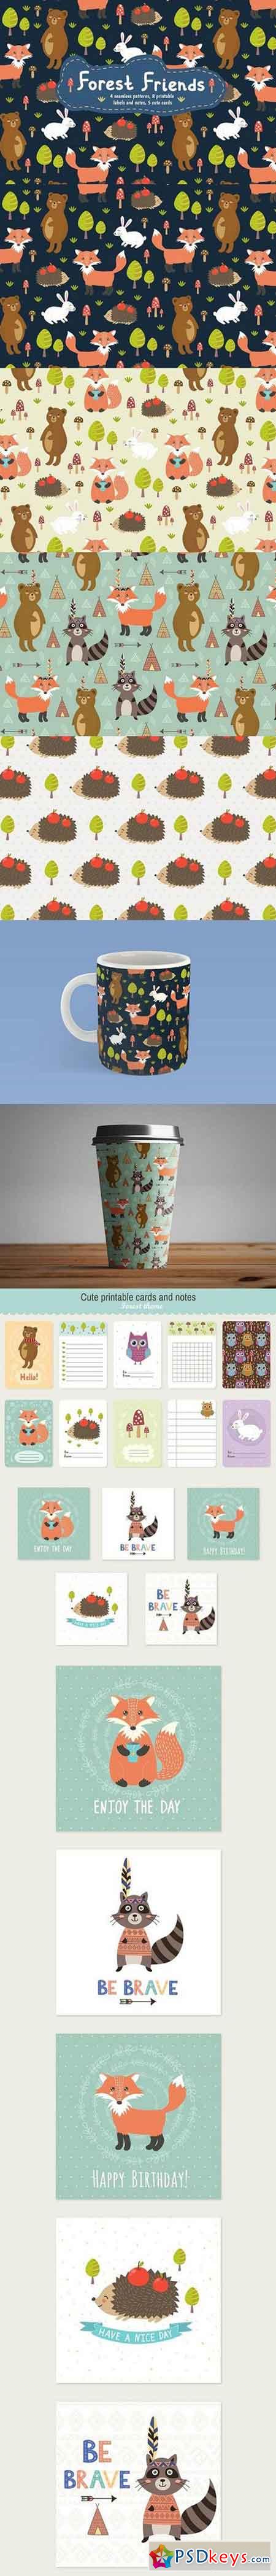 Forest Friends patterns & cards 966205